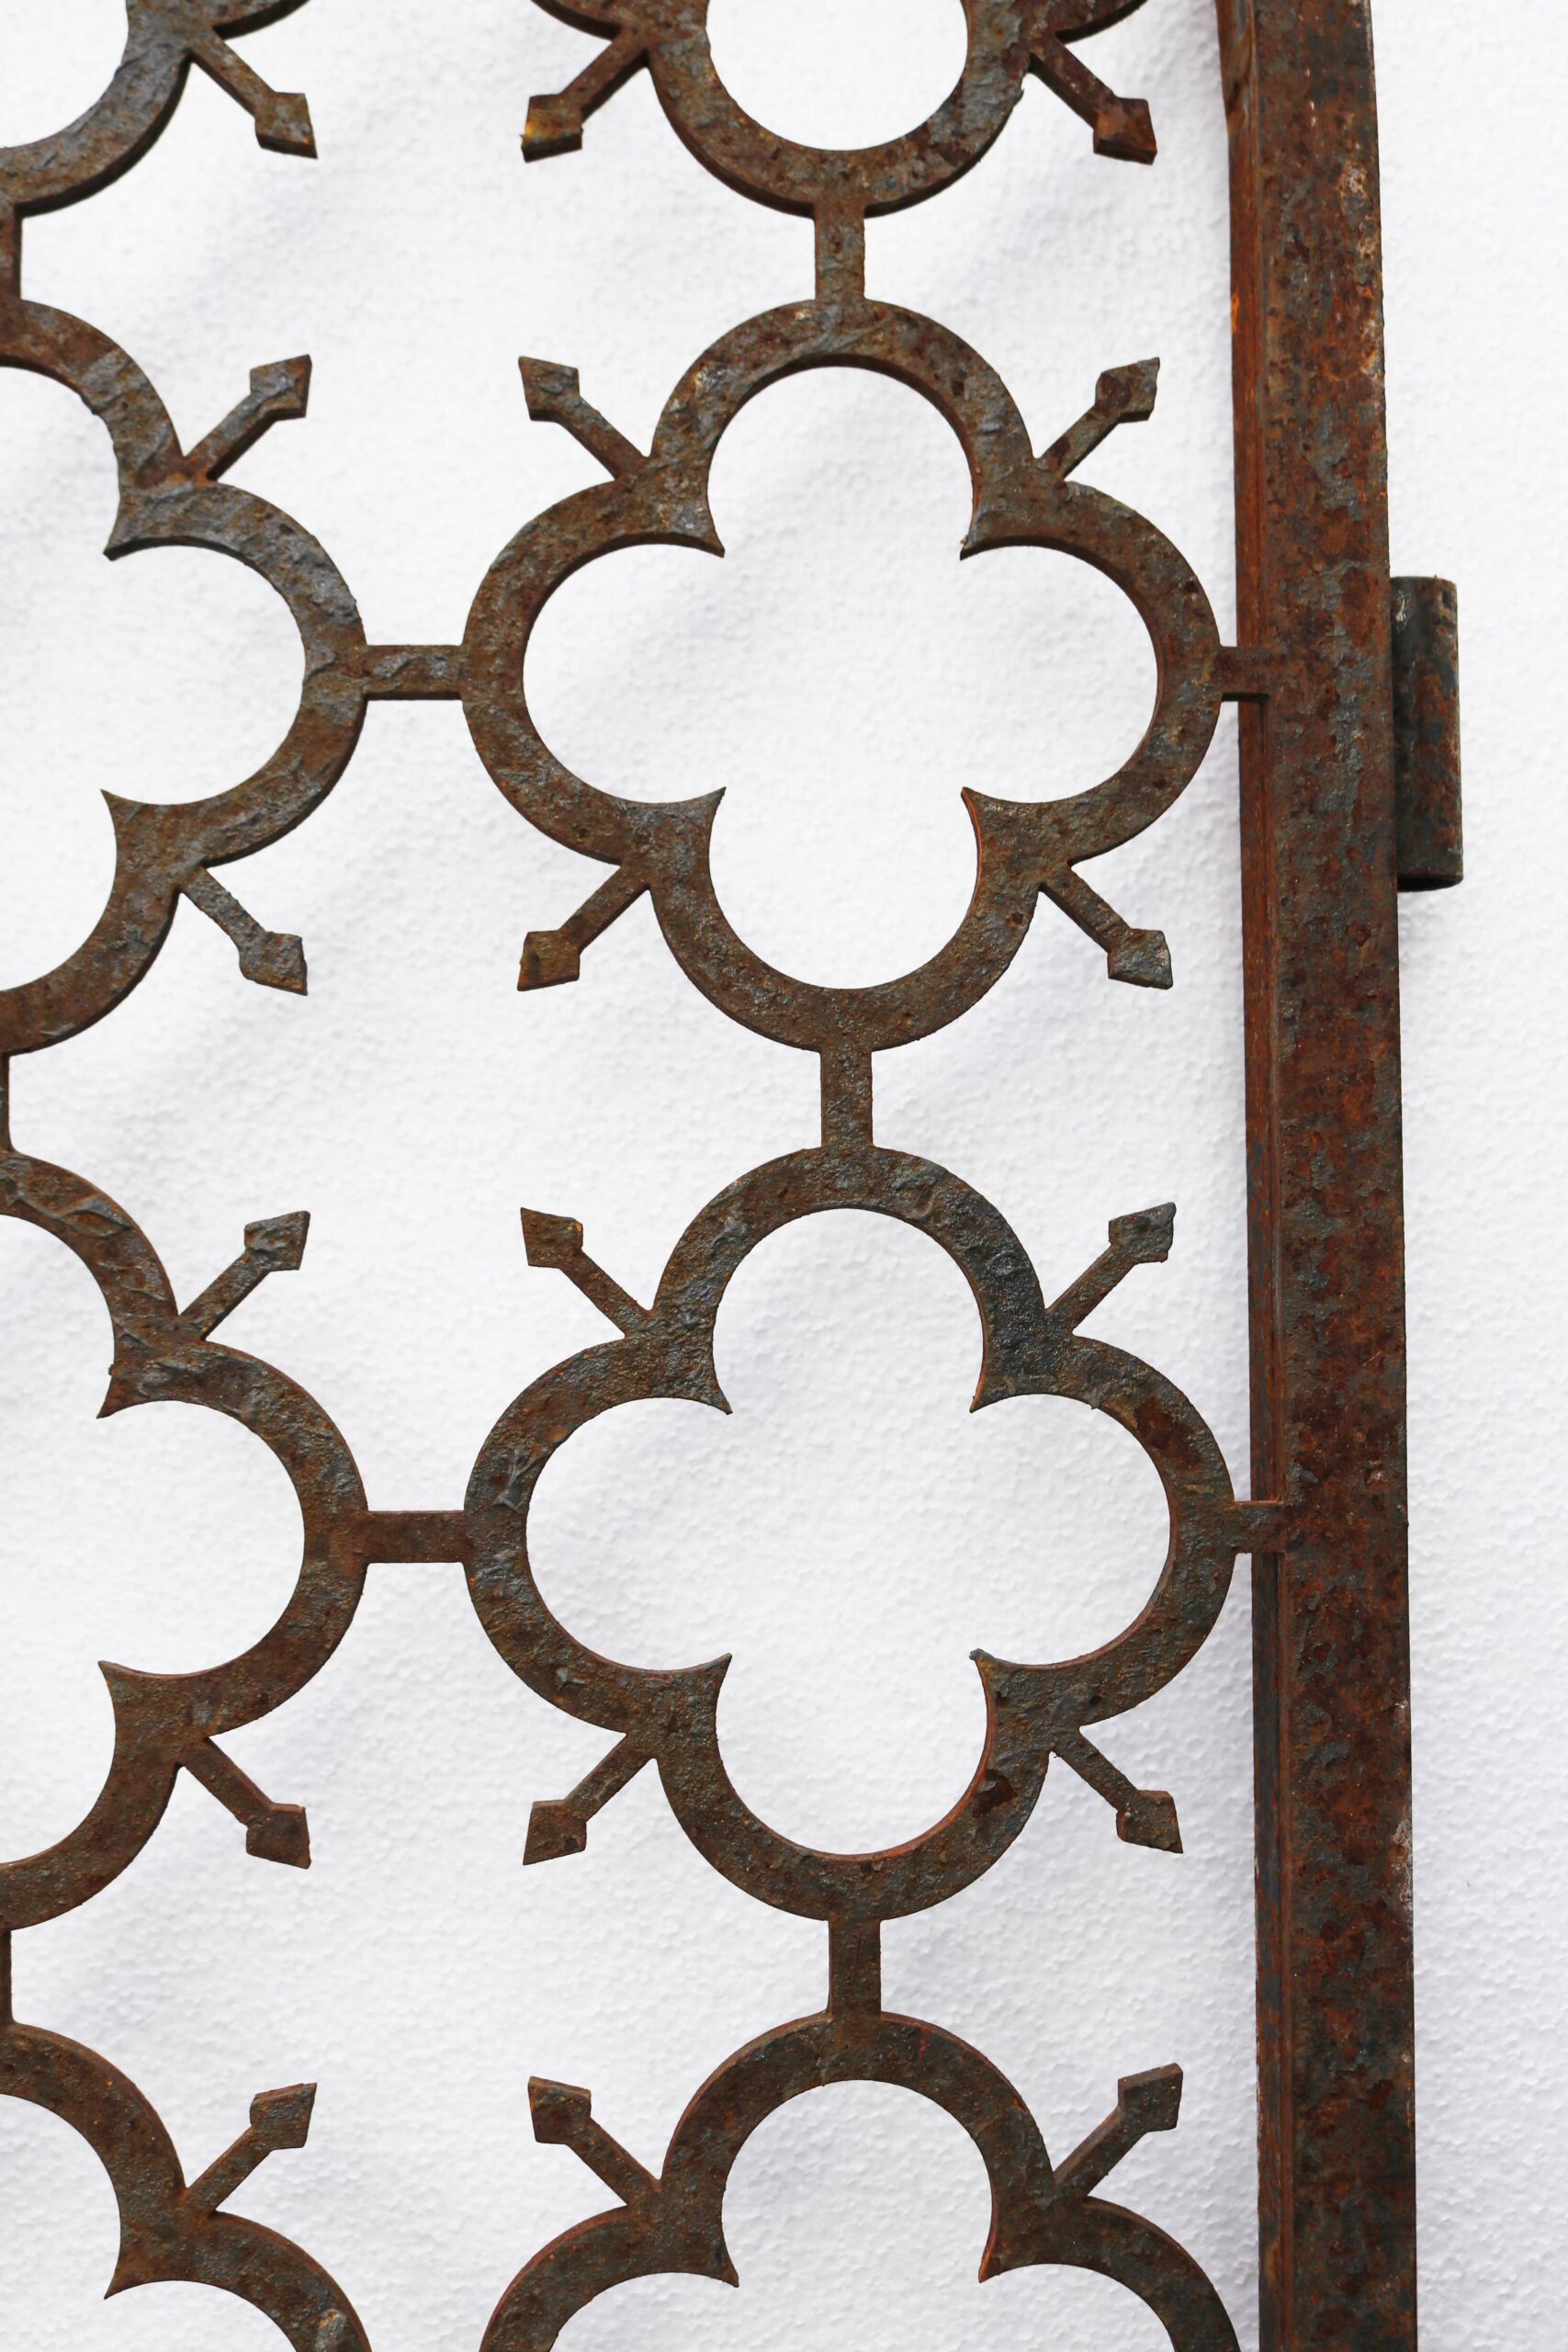 Pair of Tall Arched Metal Side Gates